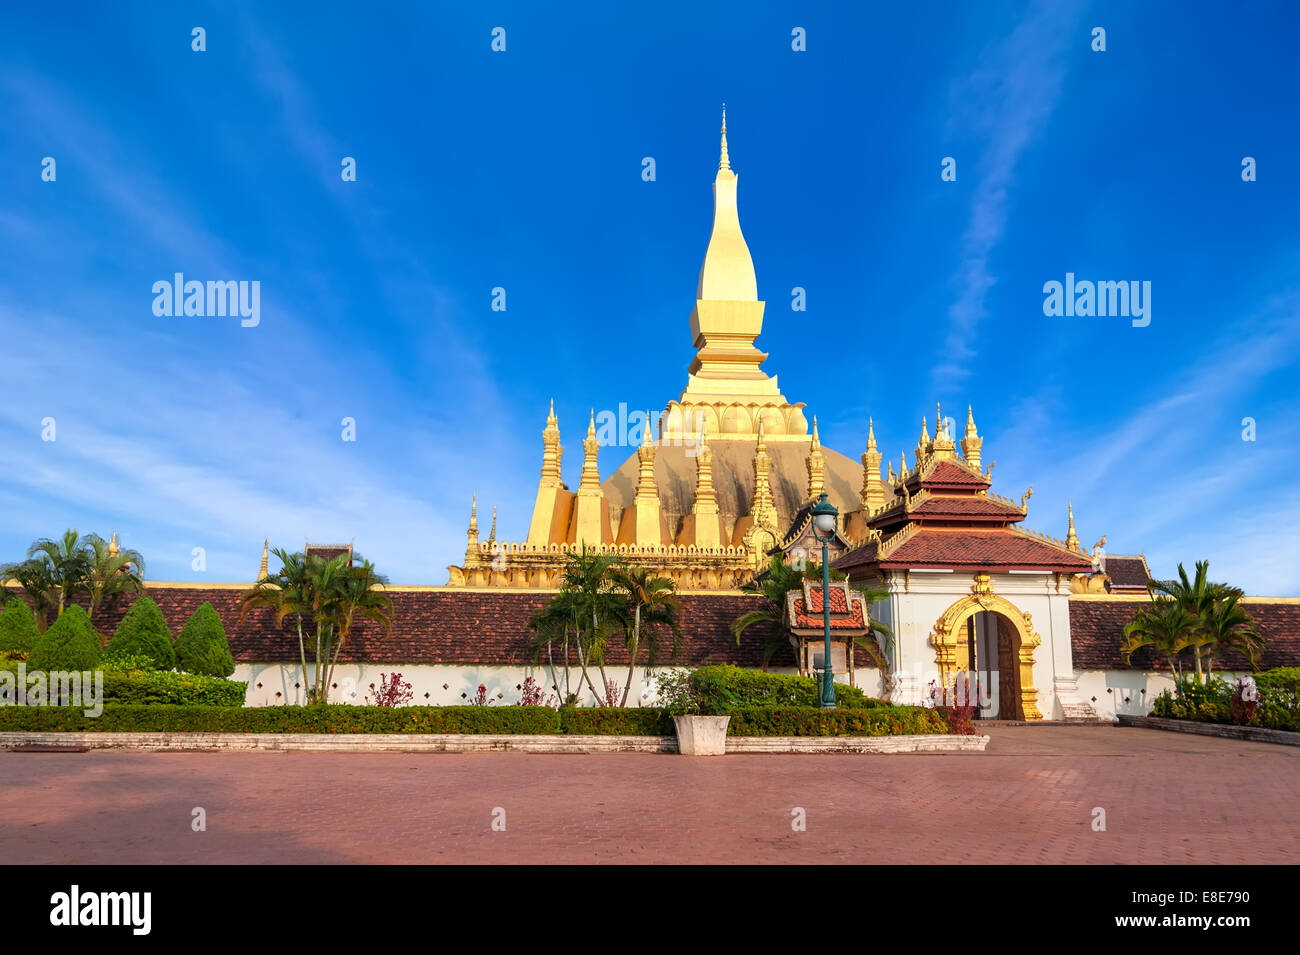 Religious architecture and landmarks. Golden buddhist pagoda of Phra That Luang Temple under blue sky. Vientiane, Laos travel la Stock Photo